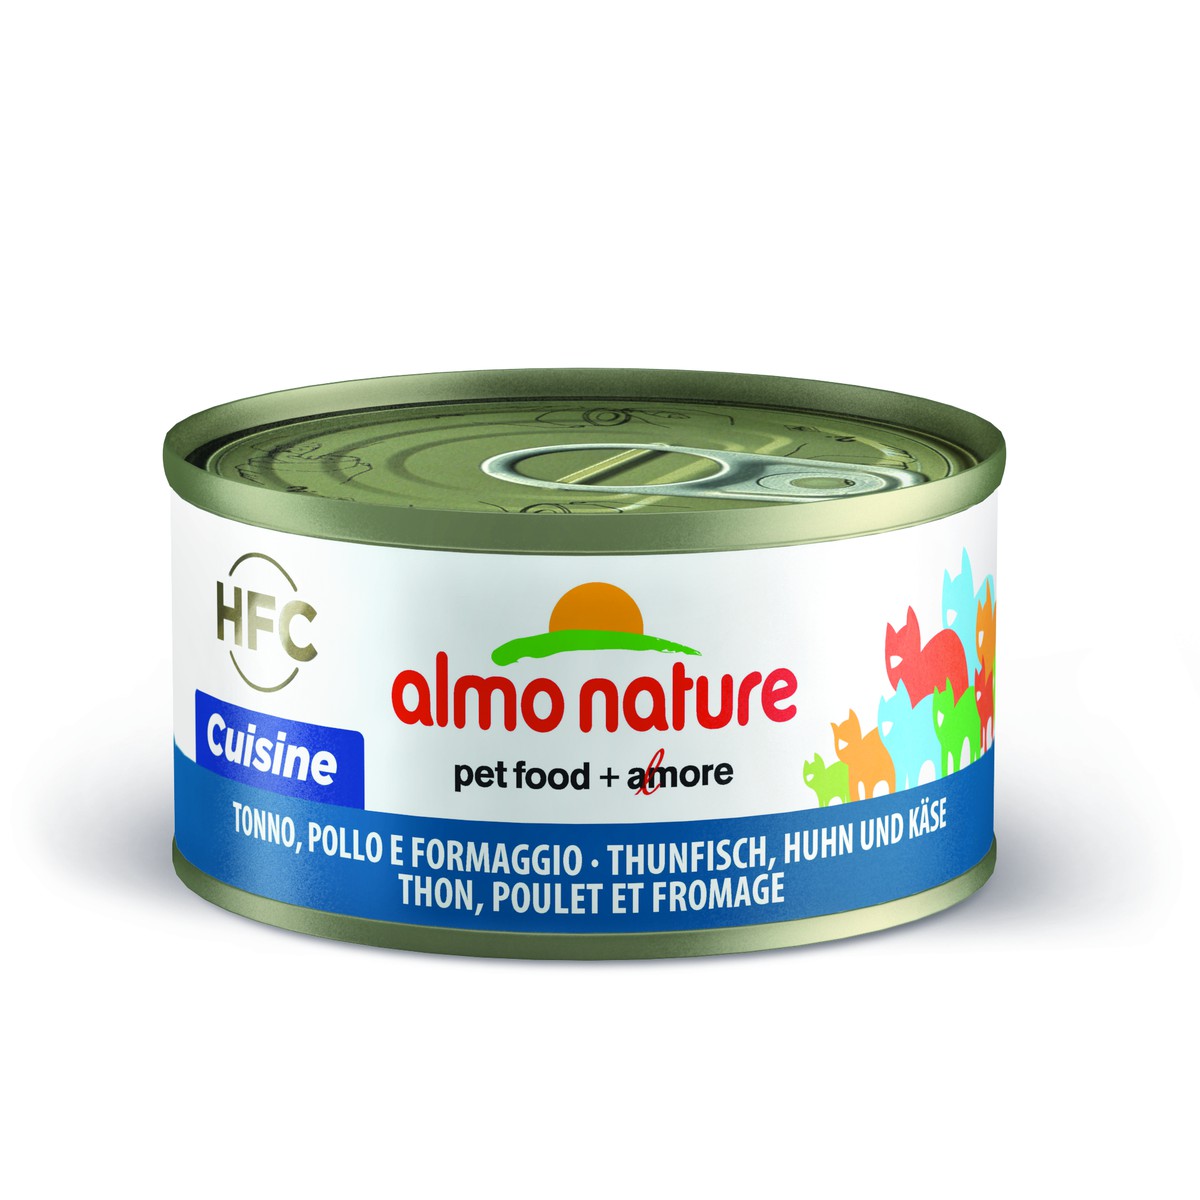 Almo nature  Almo nature  HFC CAT Natural Thon, Poulet et Fromage 70g  70 g